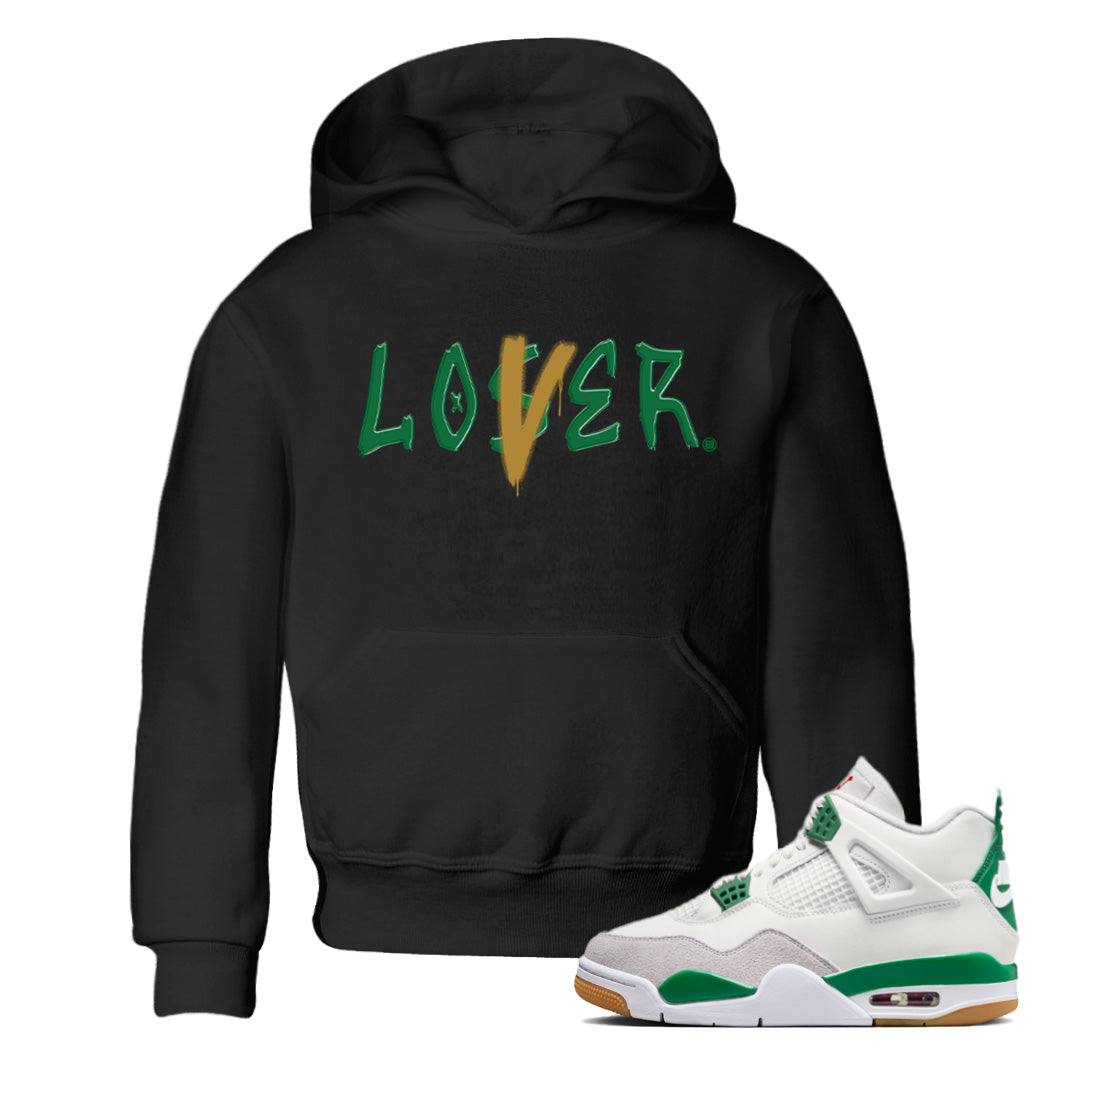 Air Jordan 4 Pine Green Loser Lover Baby and Kids Sneaker Tees Nike SB x Jordan 4 Pine Green Kids Sneaker Tees Washing and Care Tip